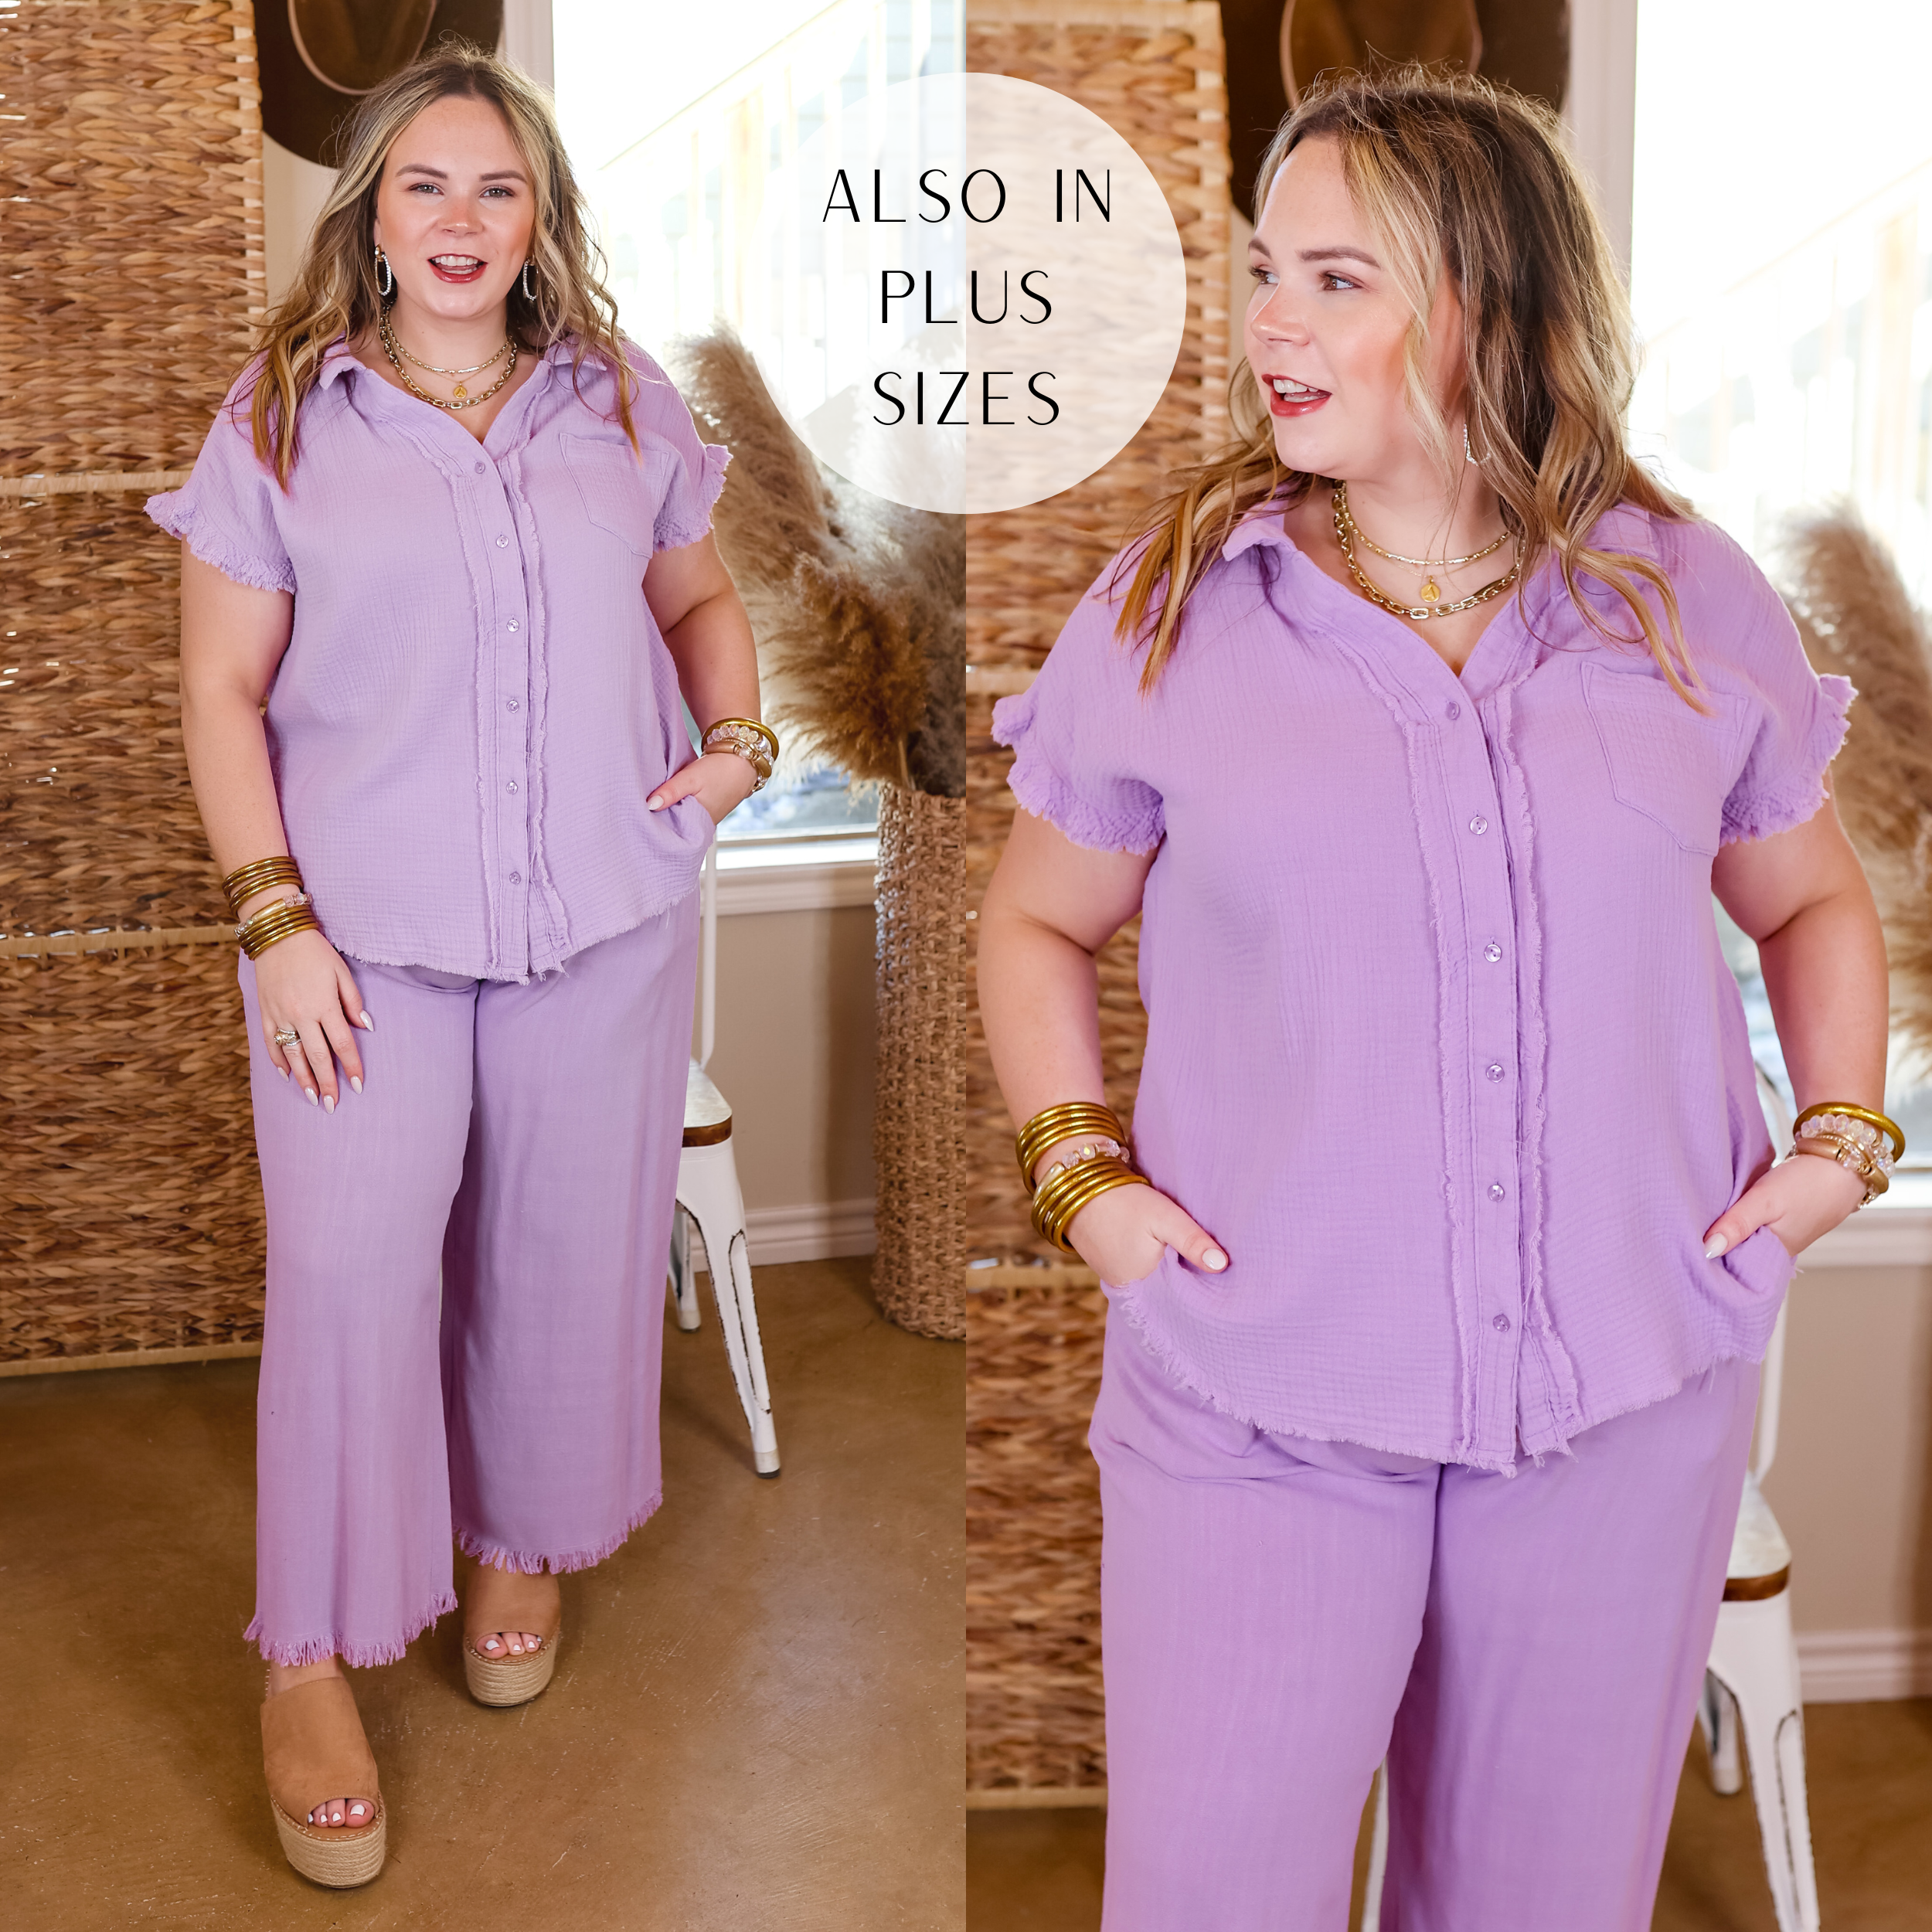 Right On Cue Button Up Raw Hem Top in Lavender Purple - Giddy Up Glamour Boutique